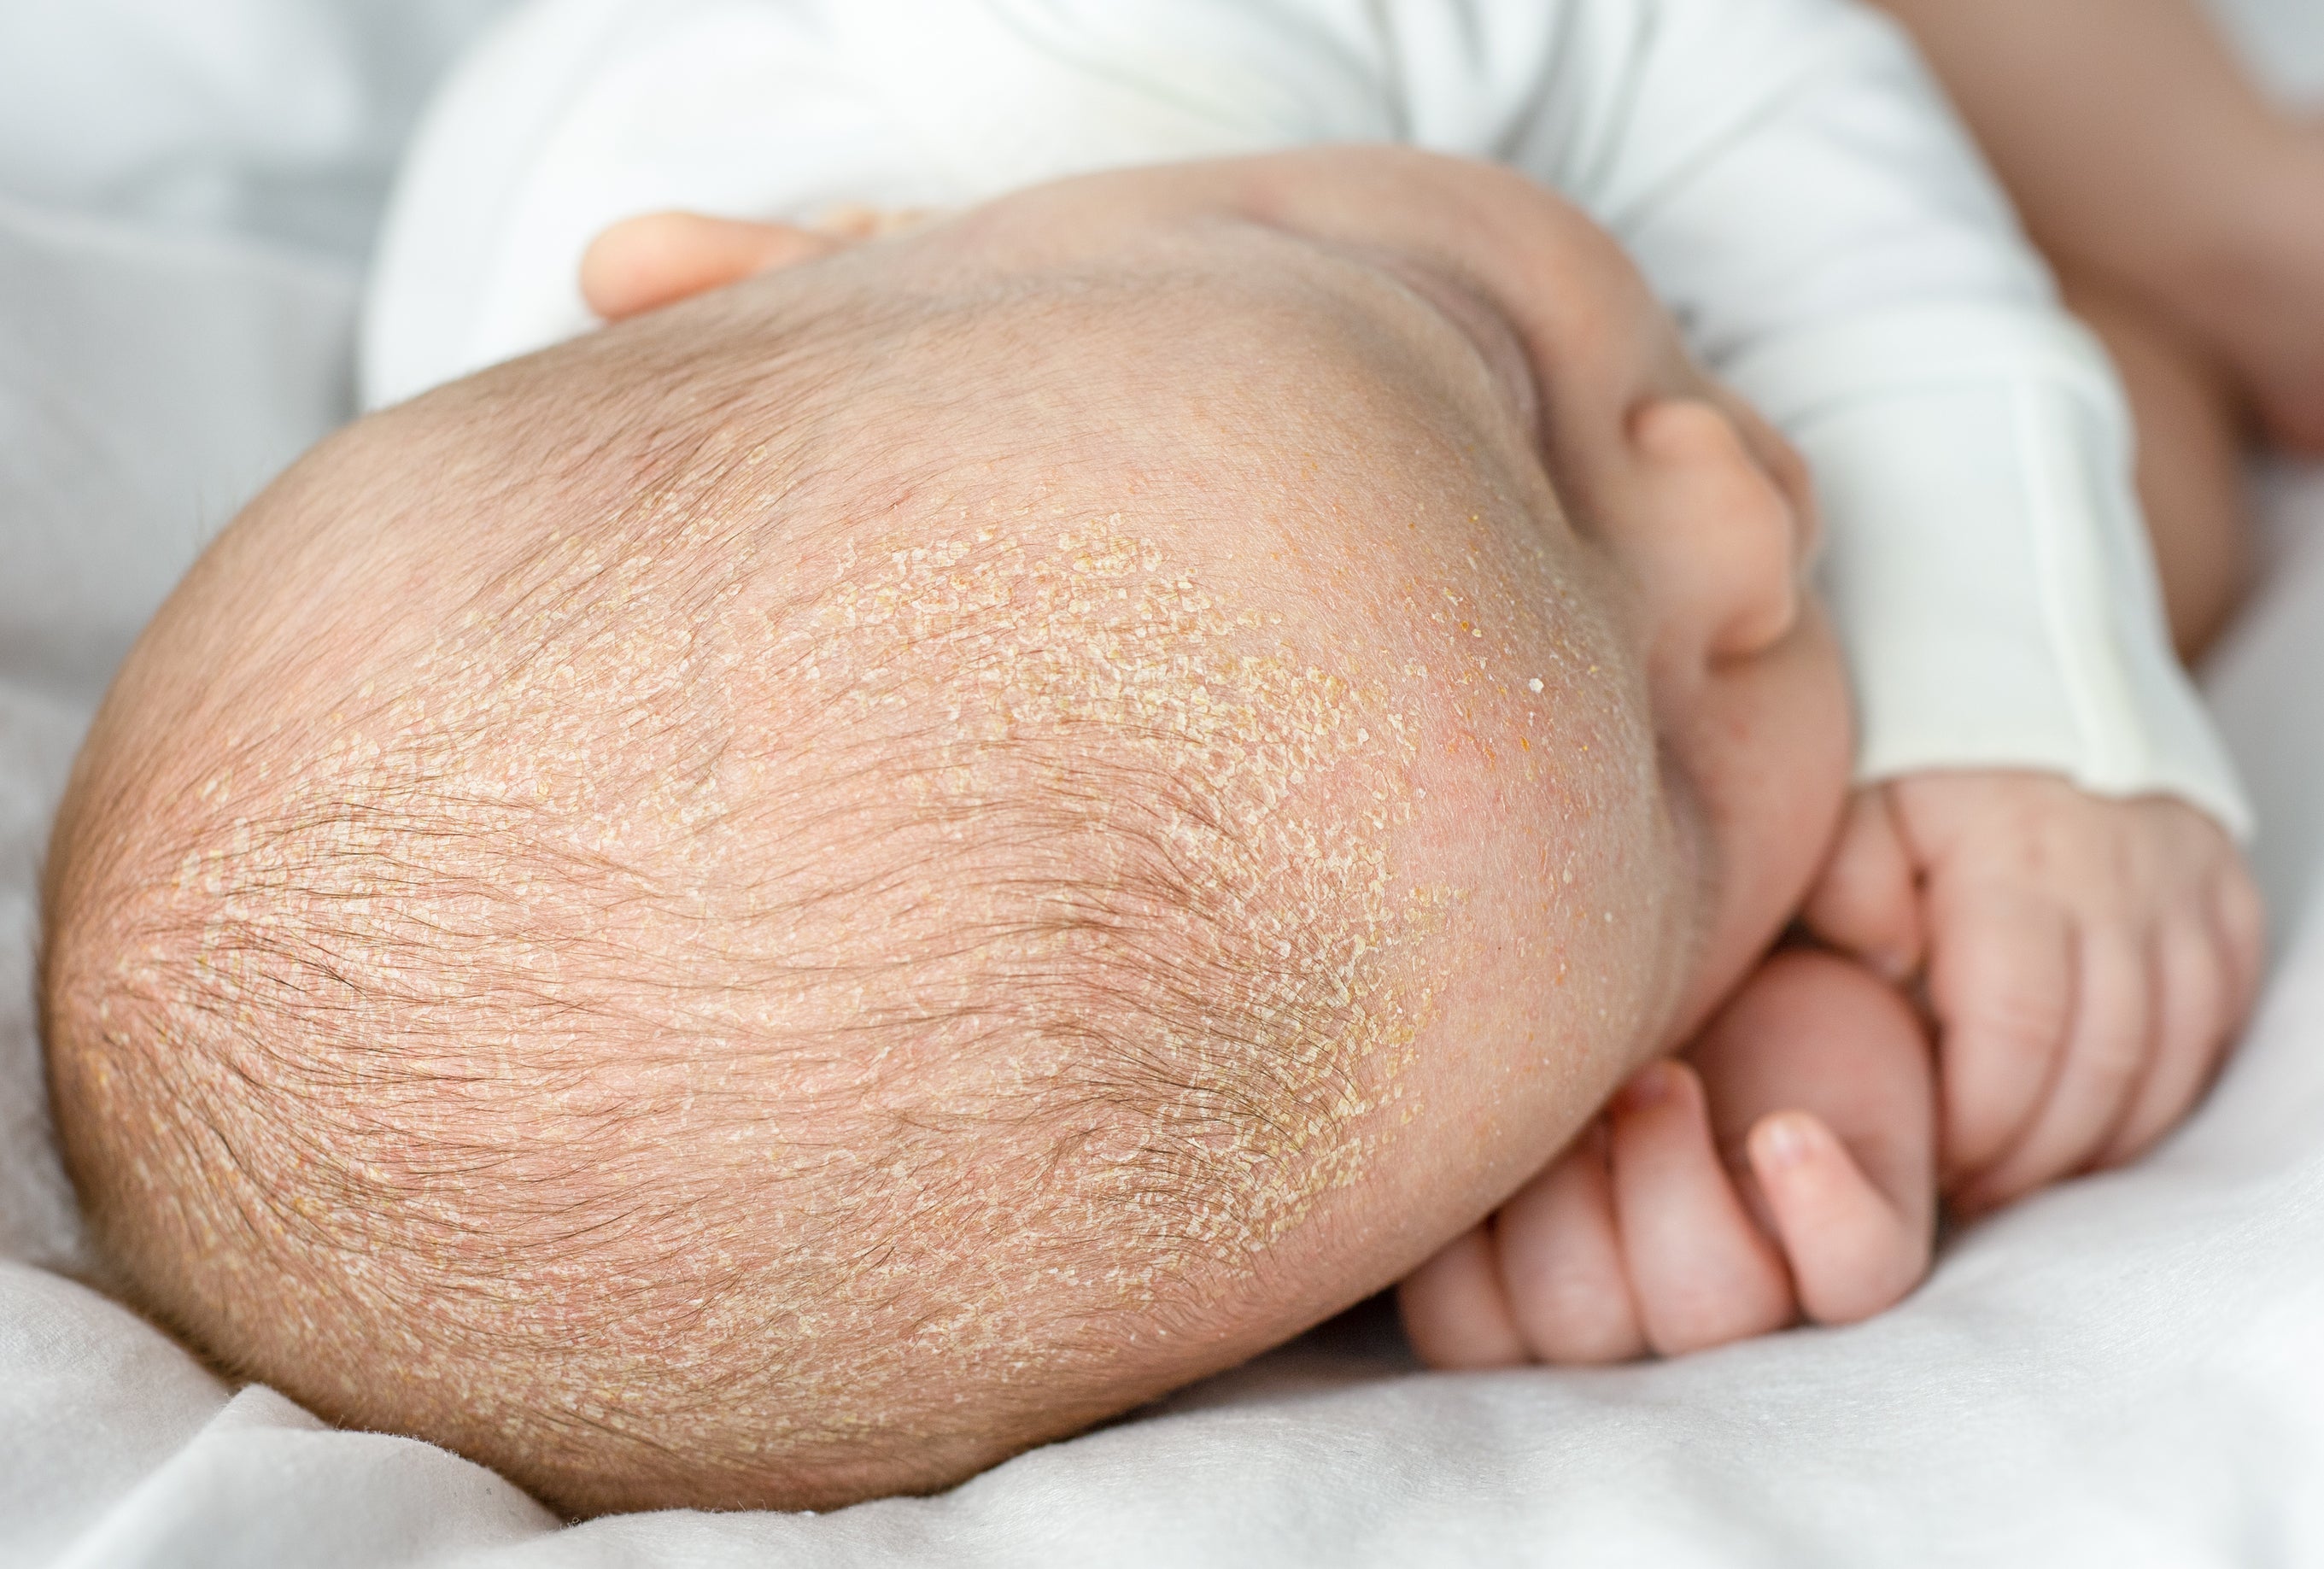 The top of a baby's head with cradle cap. Shea butter can help in treating cradle cap and can loosen the skin flakes.